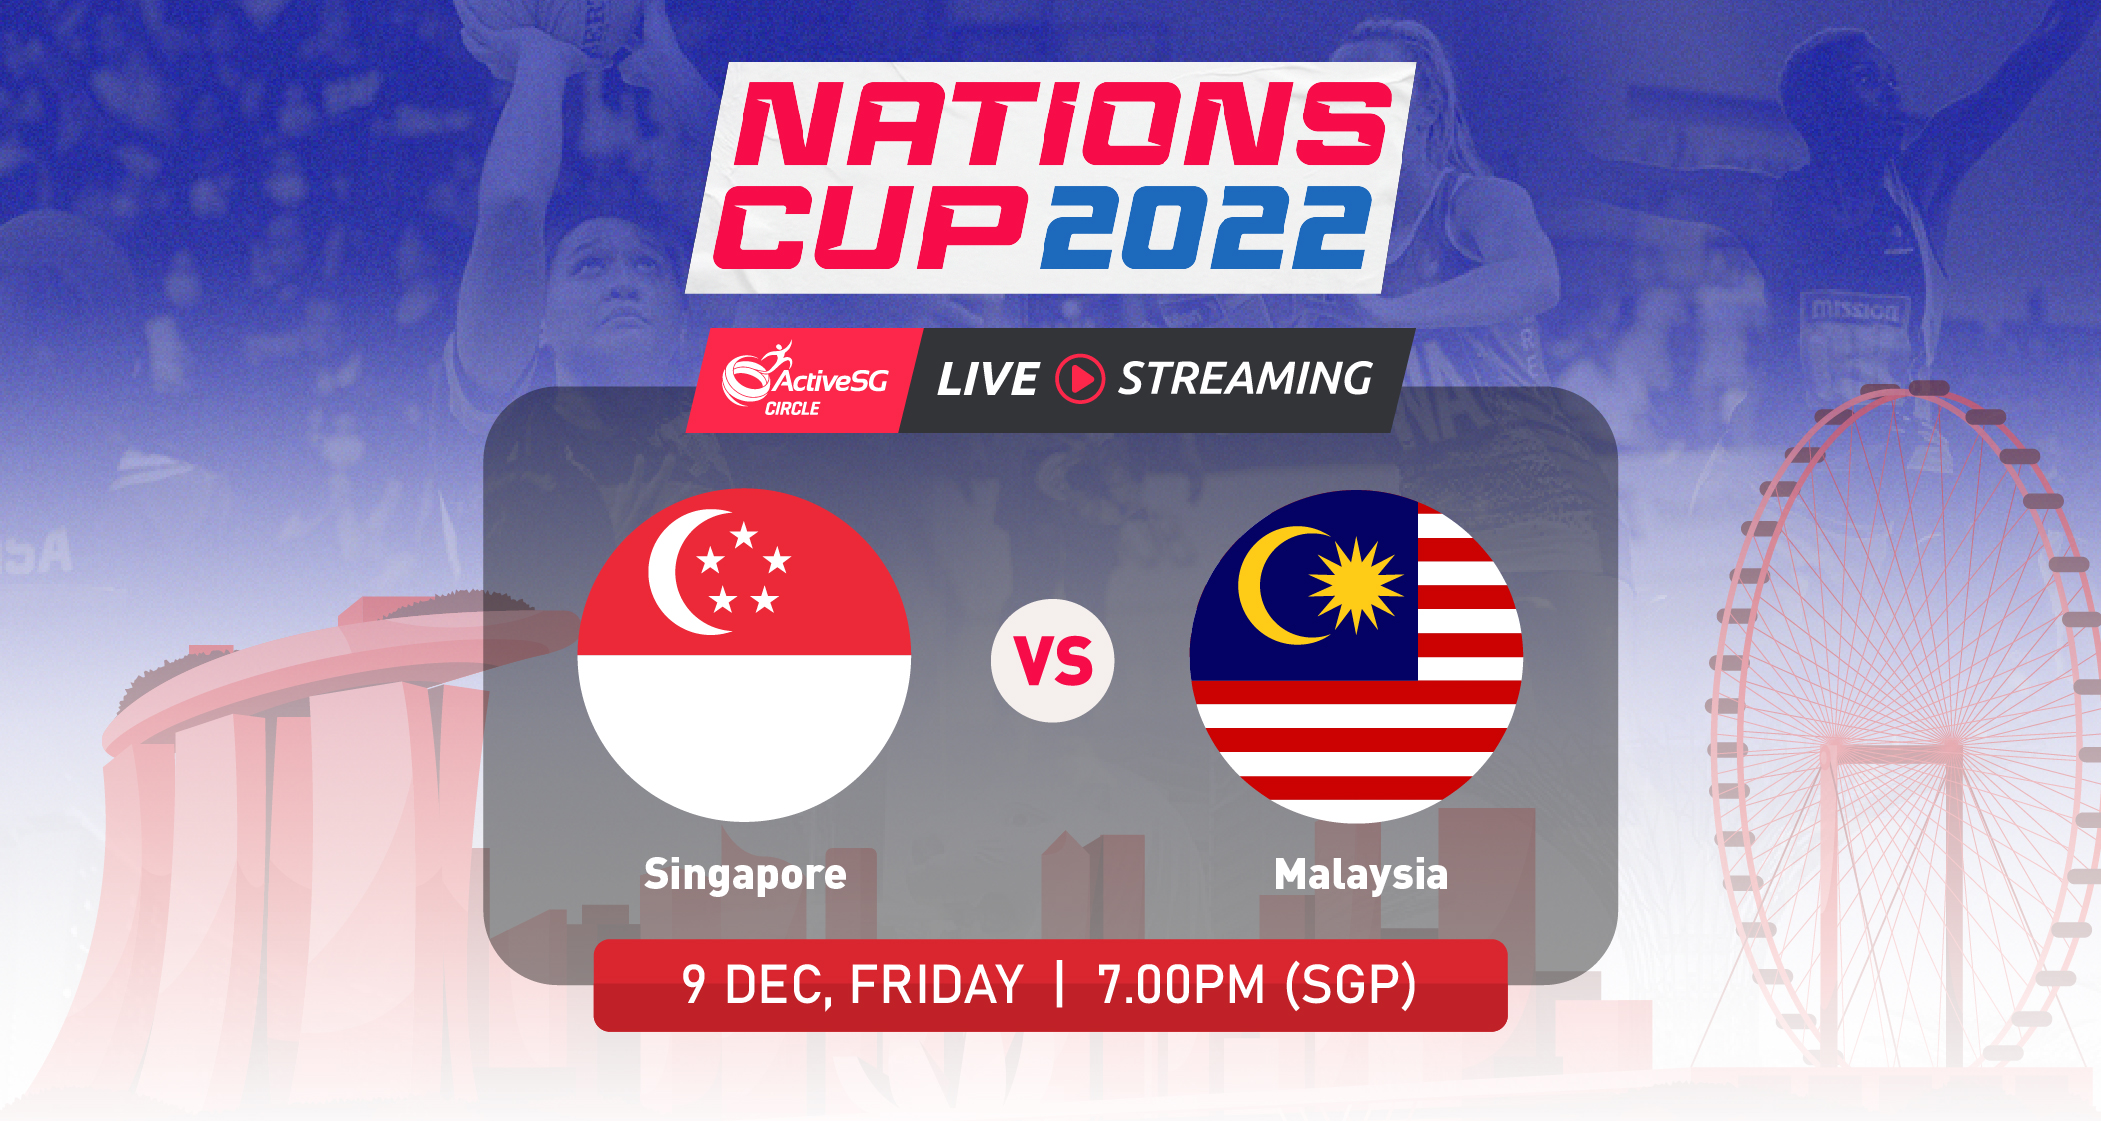 🔴 LIVE: Singapore 🇸🇬 vs 🇲🇾 Malaysia | Nations Cup 2022